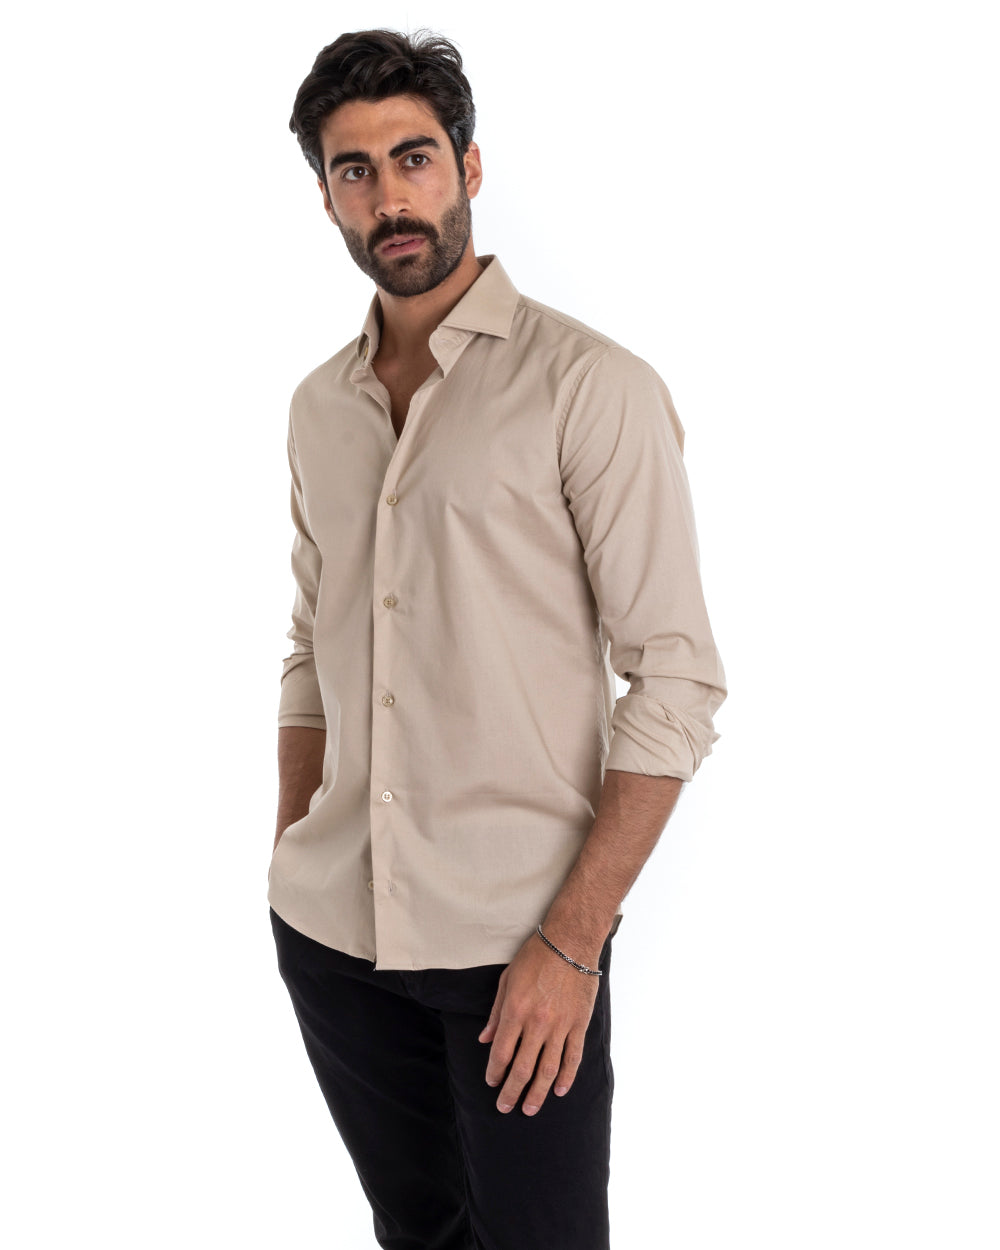 Men's Tailored Shirt With Collar Long Sleeve Basic Soft Cotton Beige Regular Fit GIOSAL-C2394A